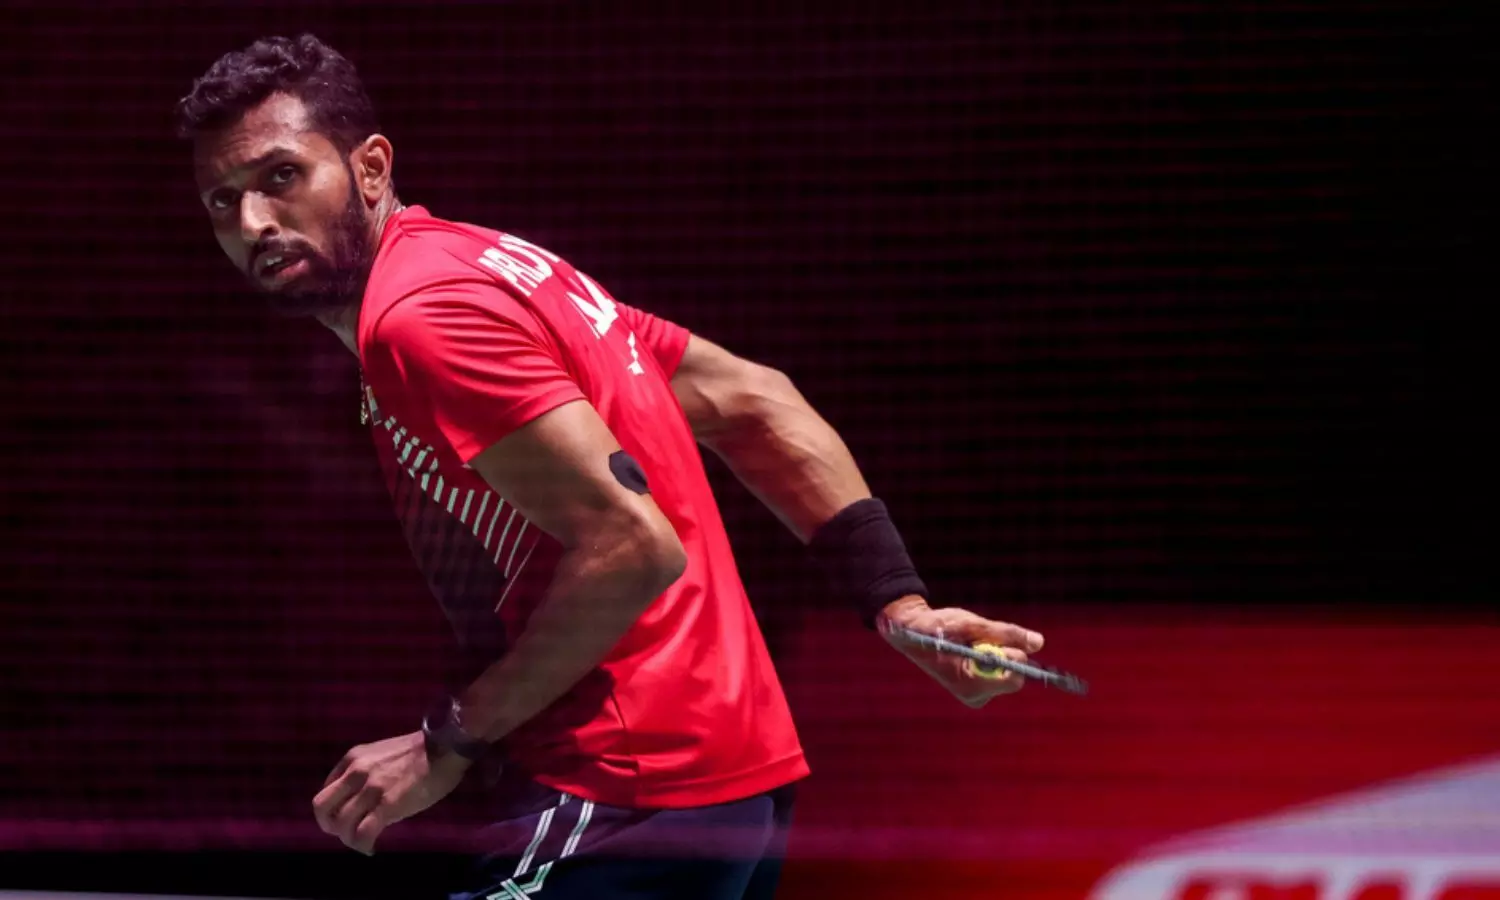 BWF World Tour Finals - HS Prannoy only Indian in action